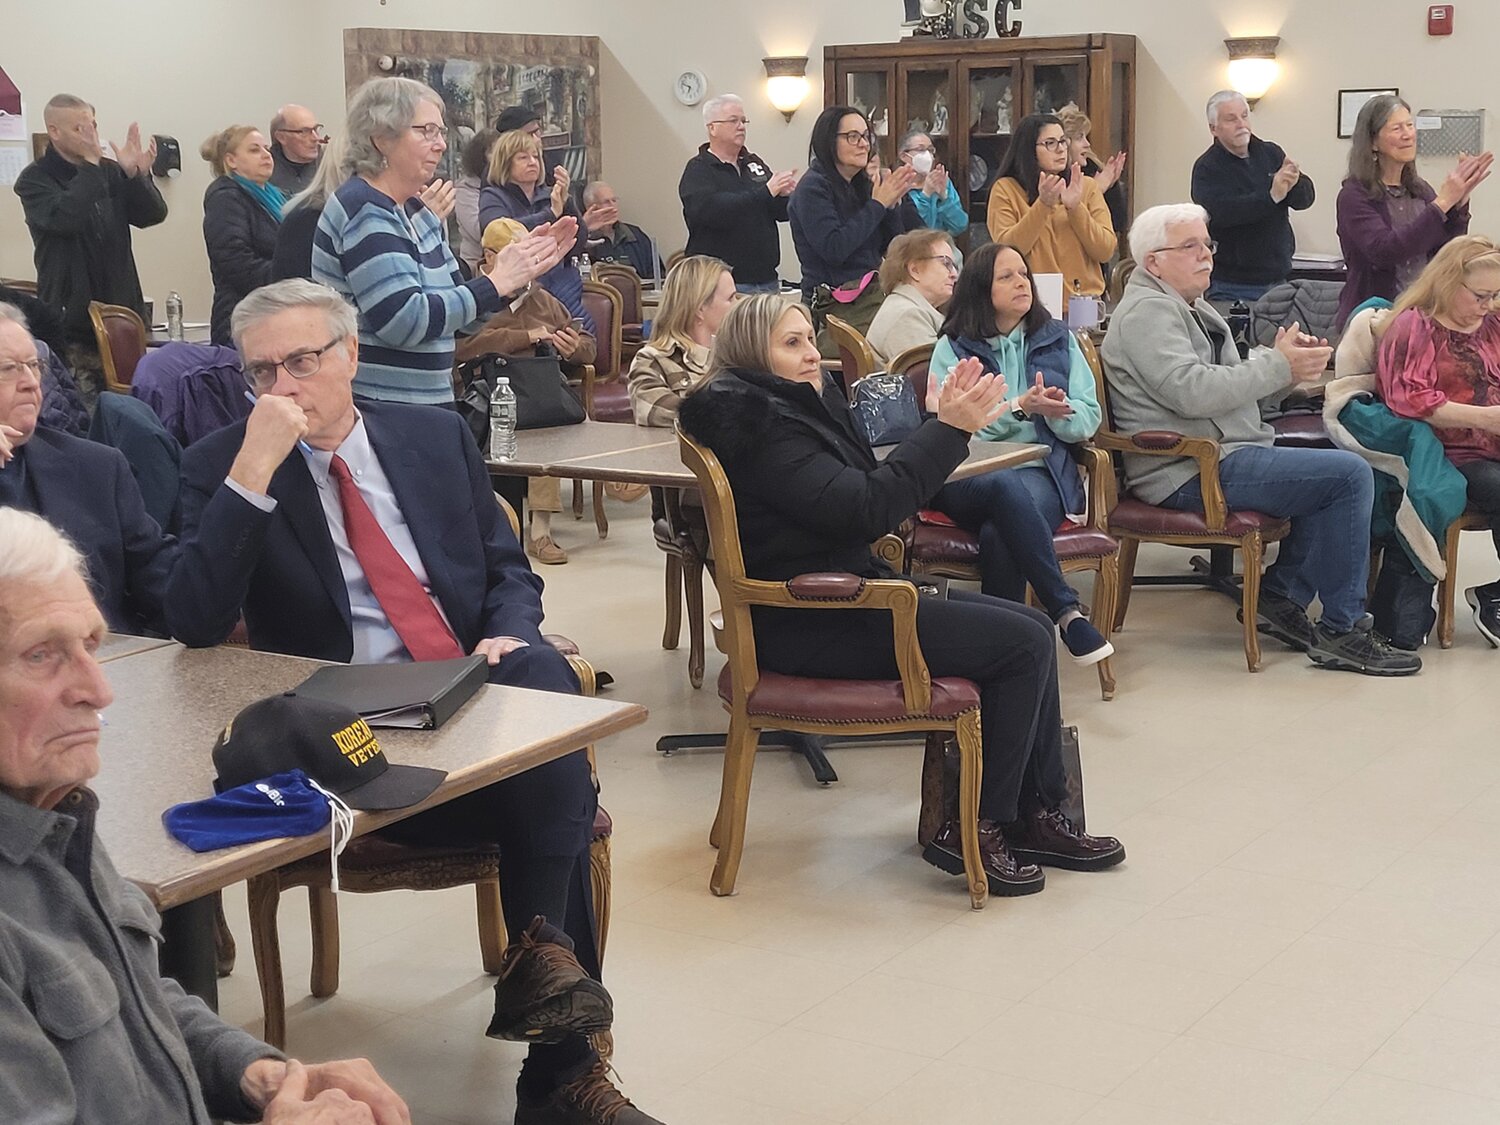 SOLAR ECLIPSED: Residents gathered for Thursday’s Johnston Zoning Board meeting delivered a standing ovation to the board once it voted to deny Cranston-based Green Development’s application to build a solar farm.